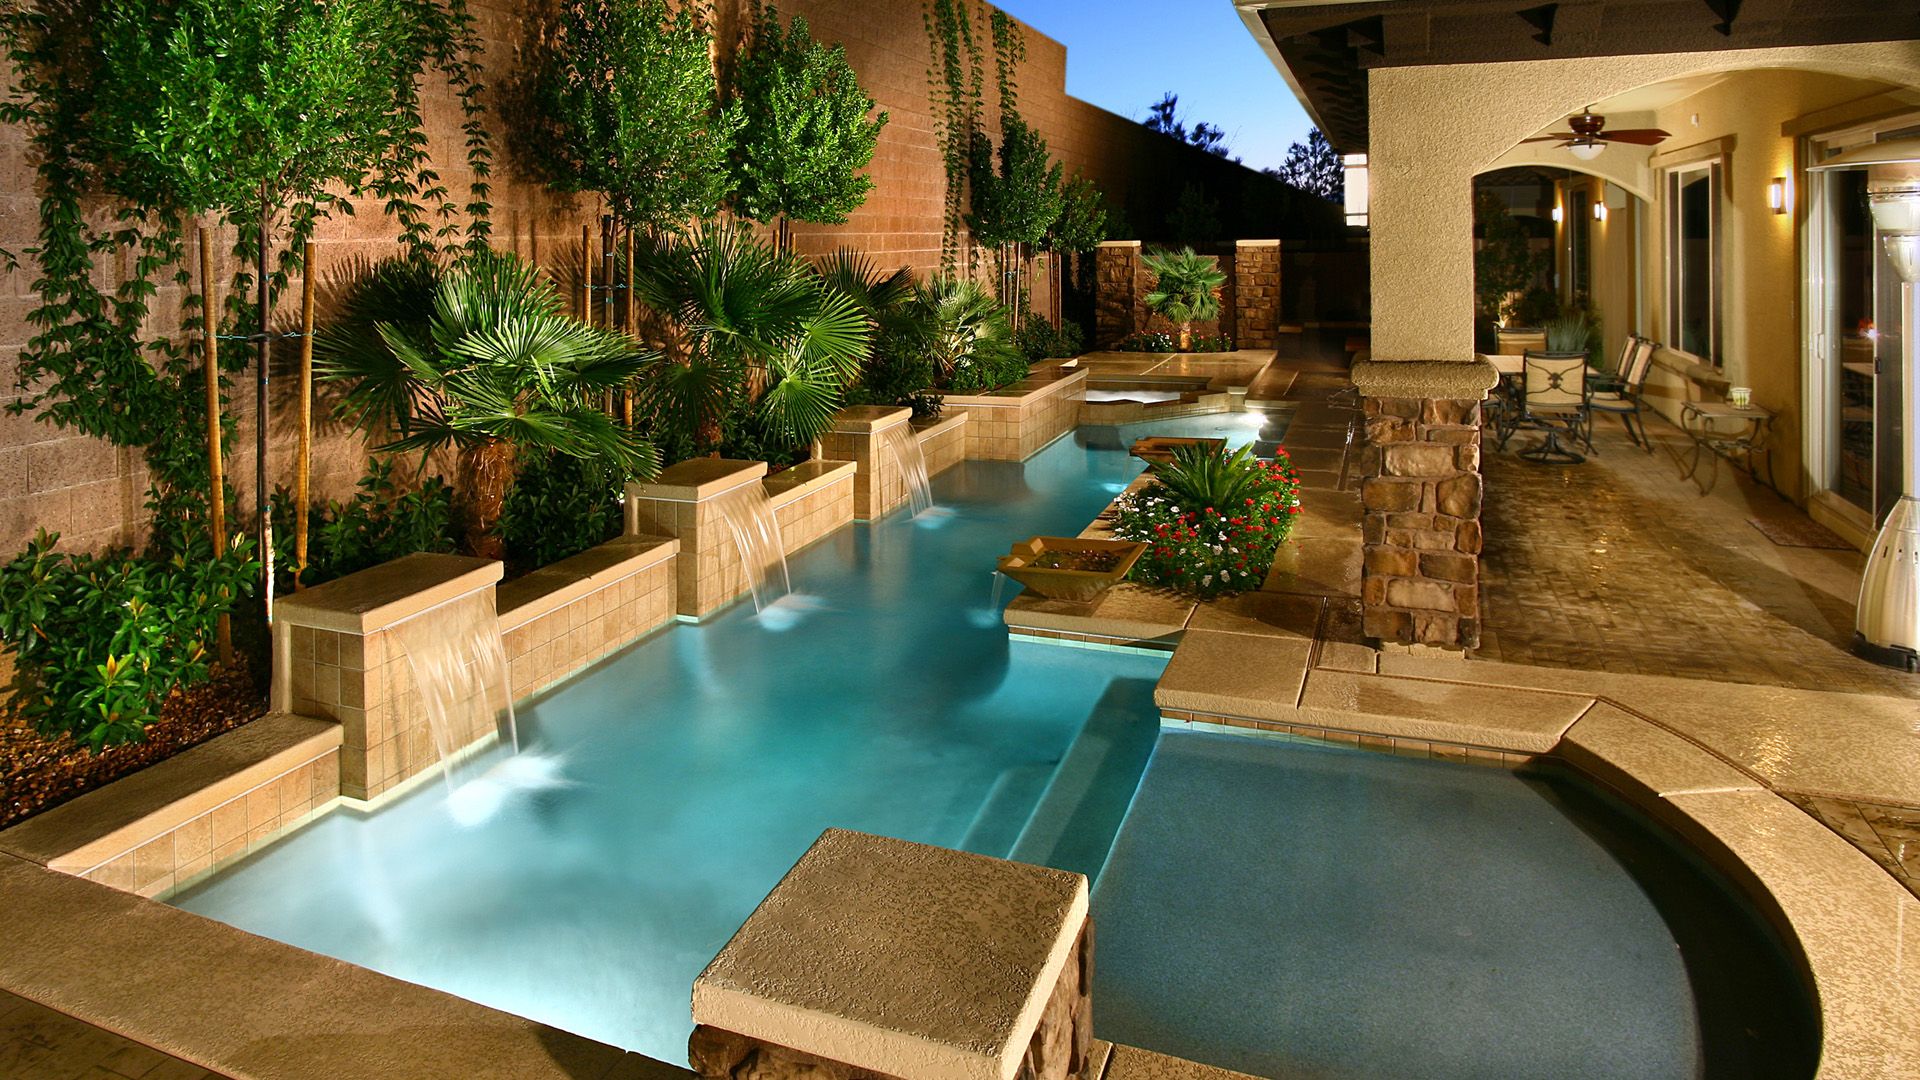 in this company focus on every aspect of Boerne spas requirements of their clients.